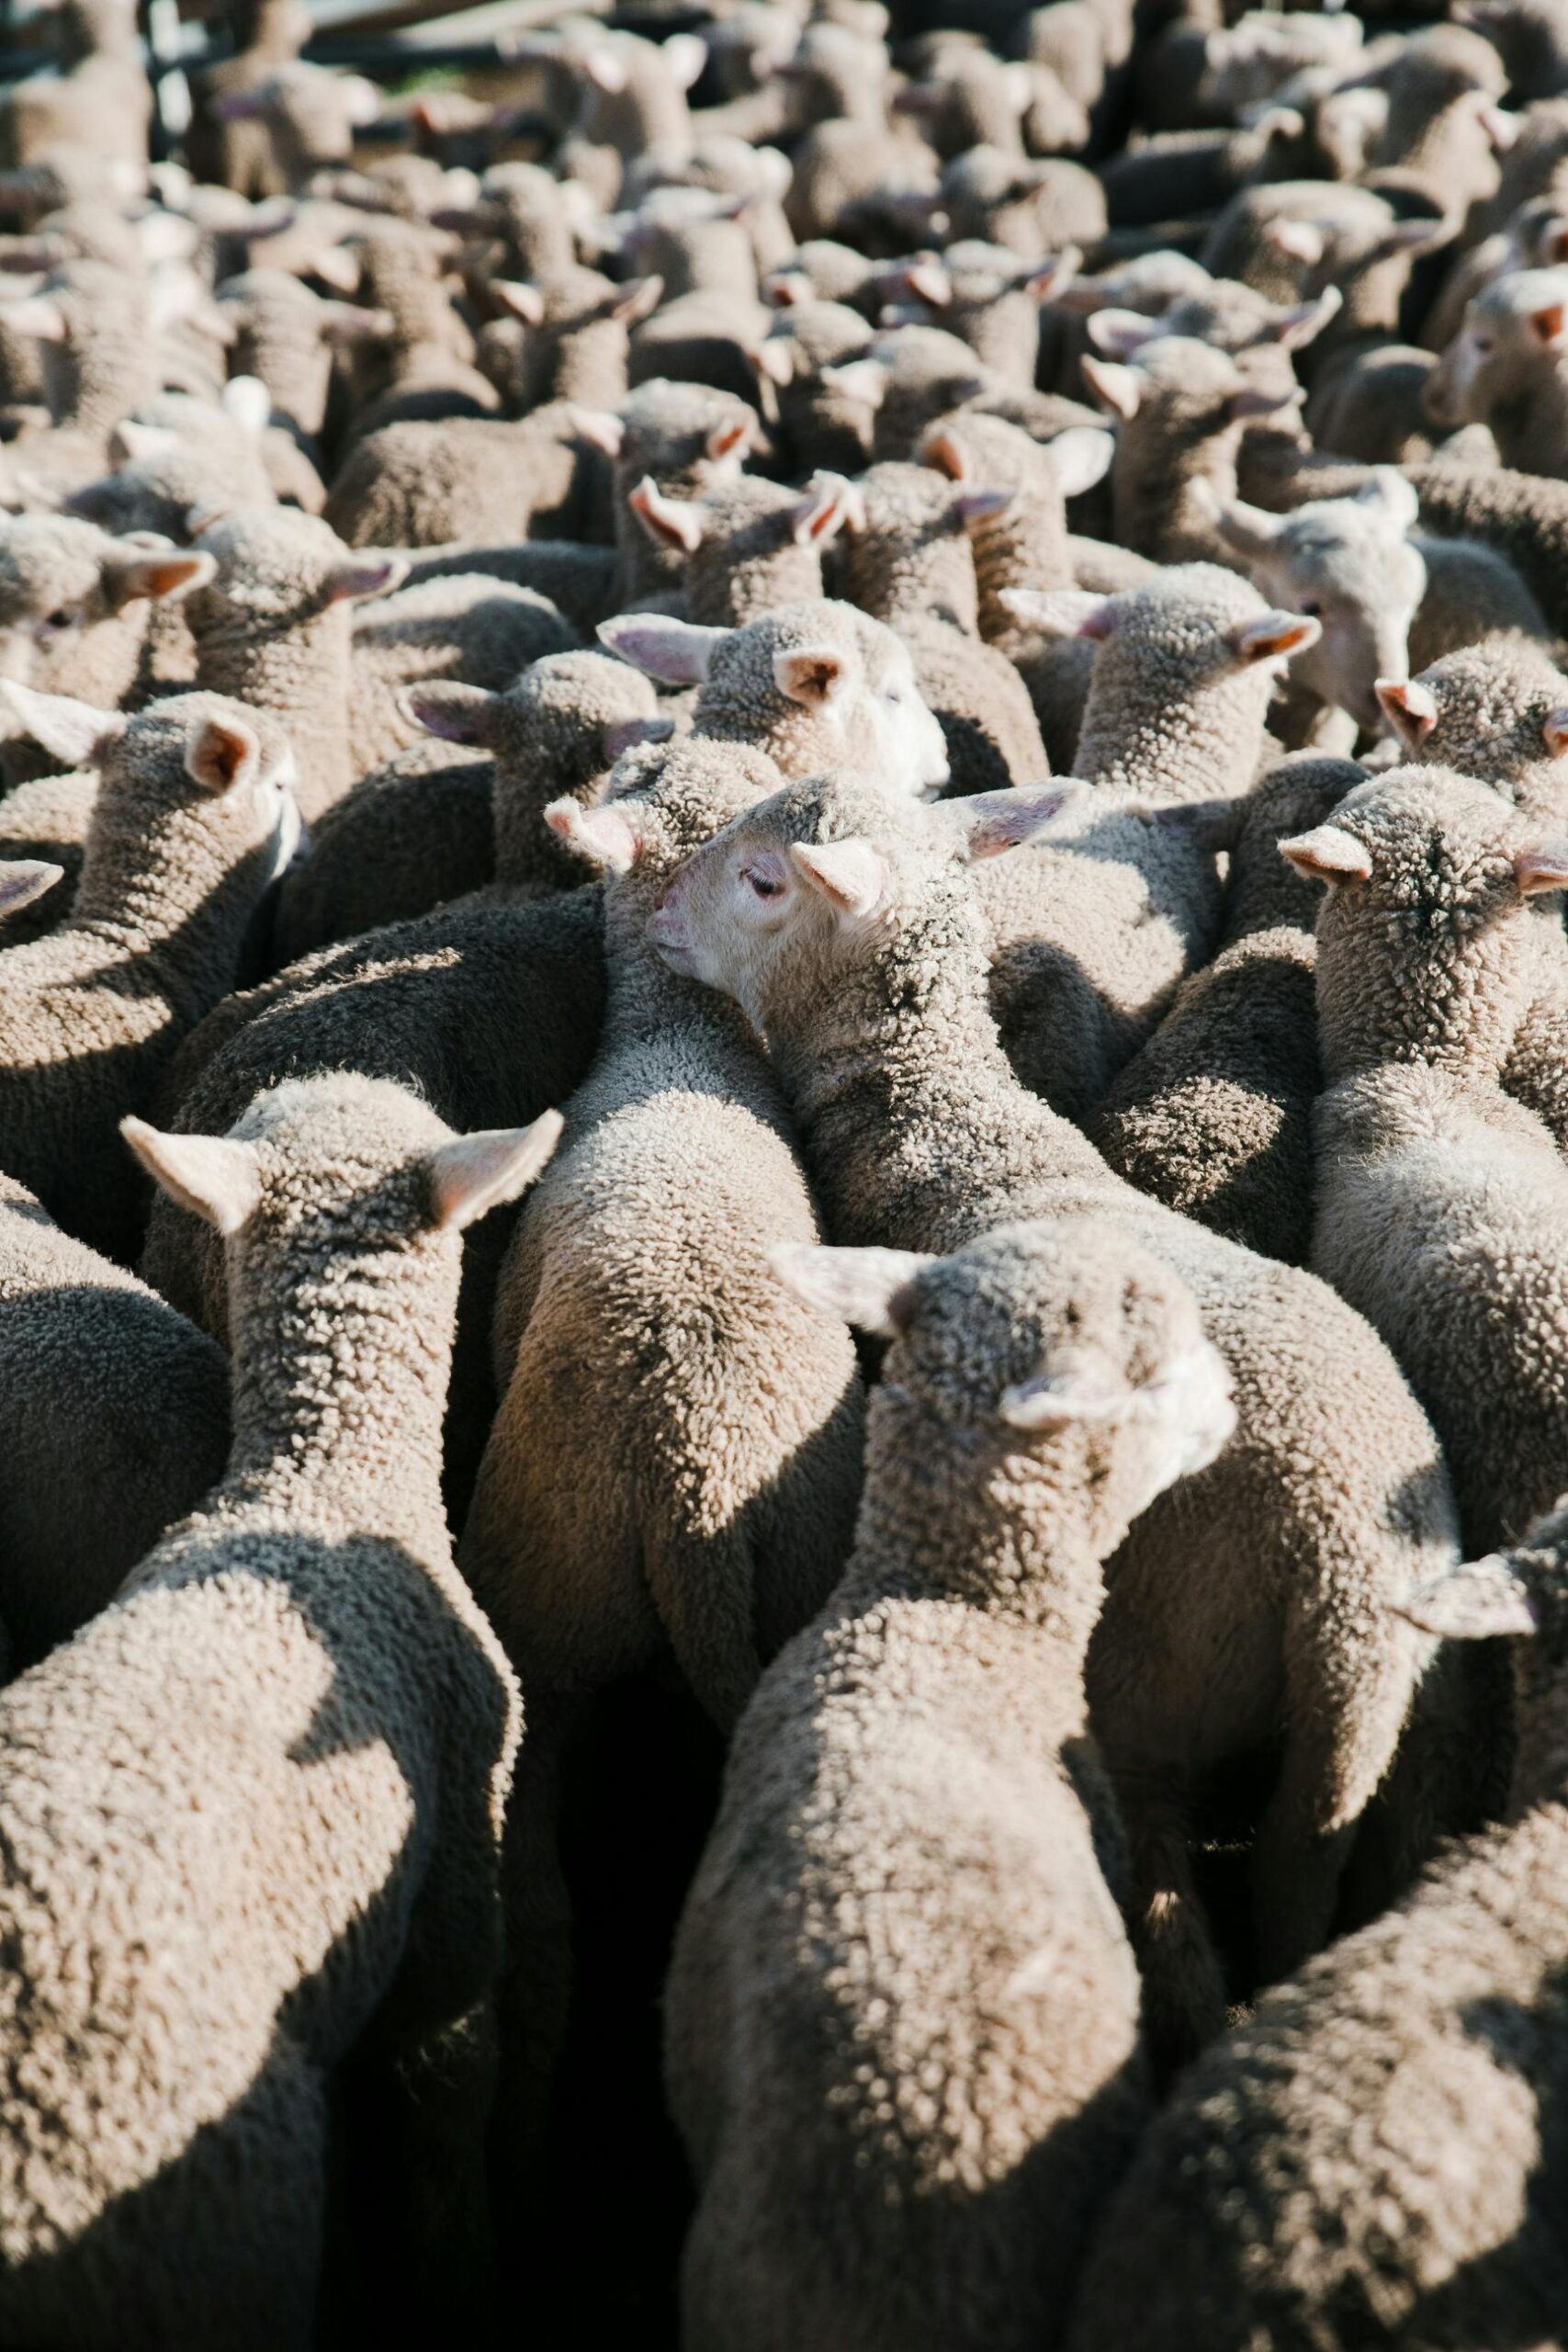 Over view of a herd of lamds.